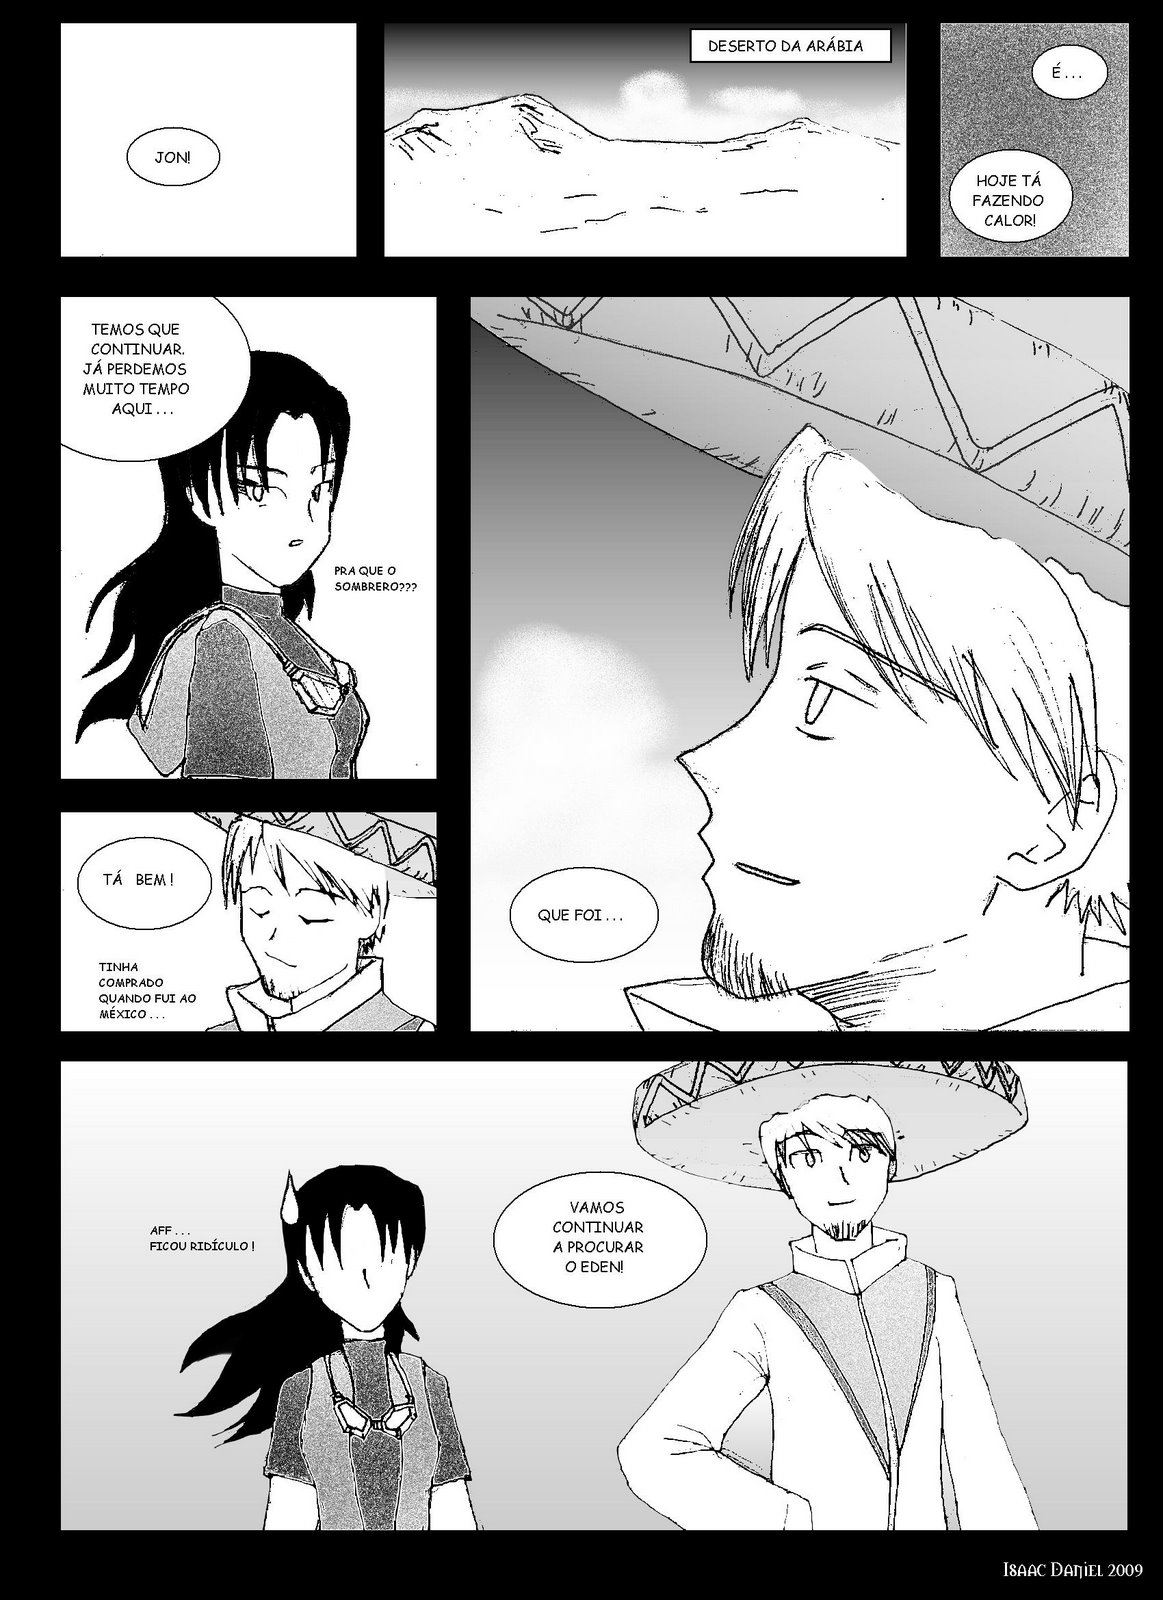 [Project03-page01.JPG]